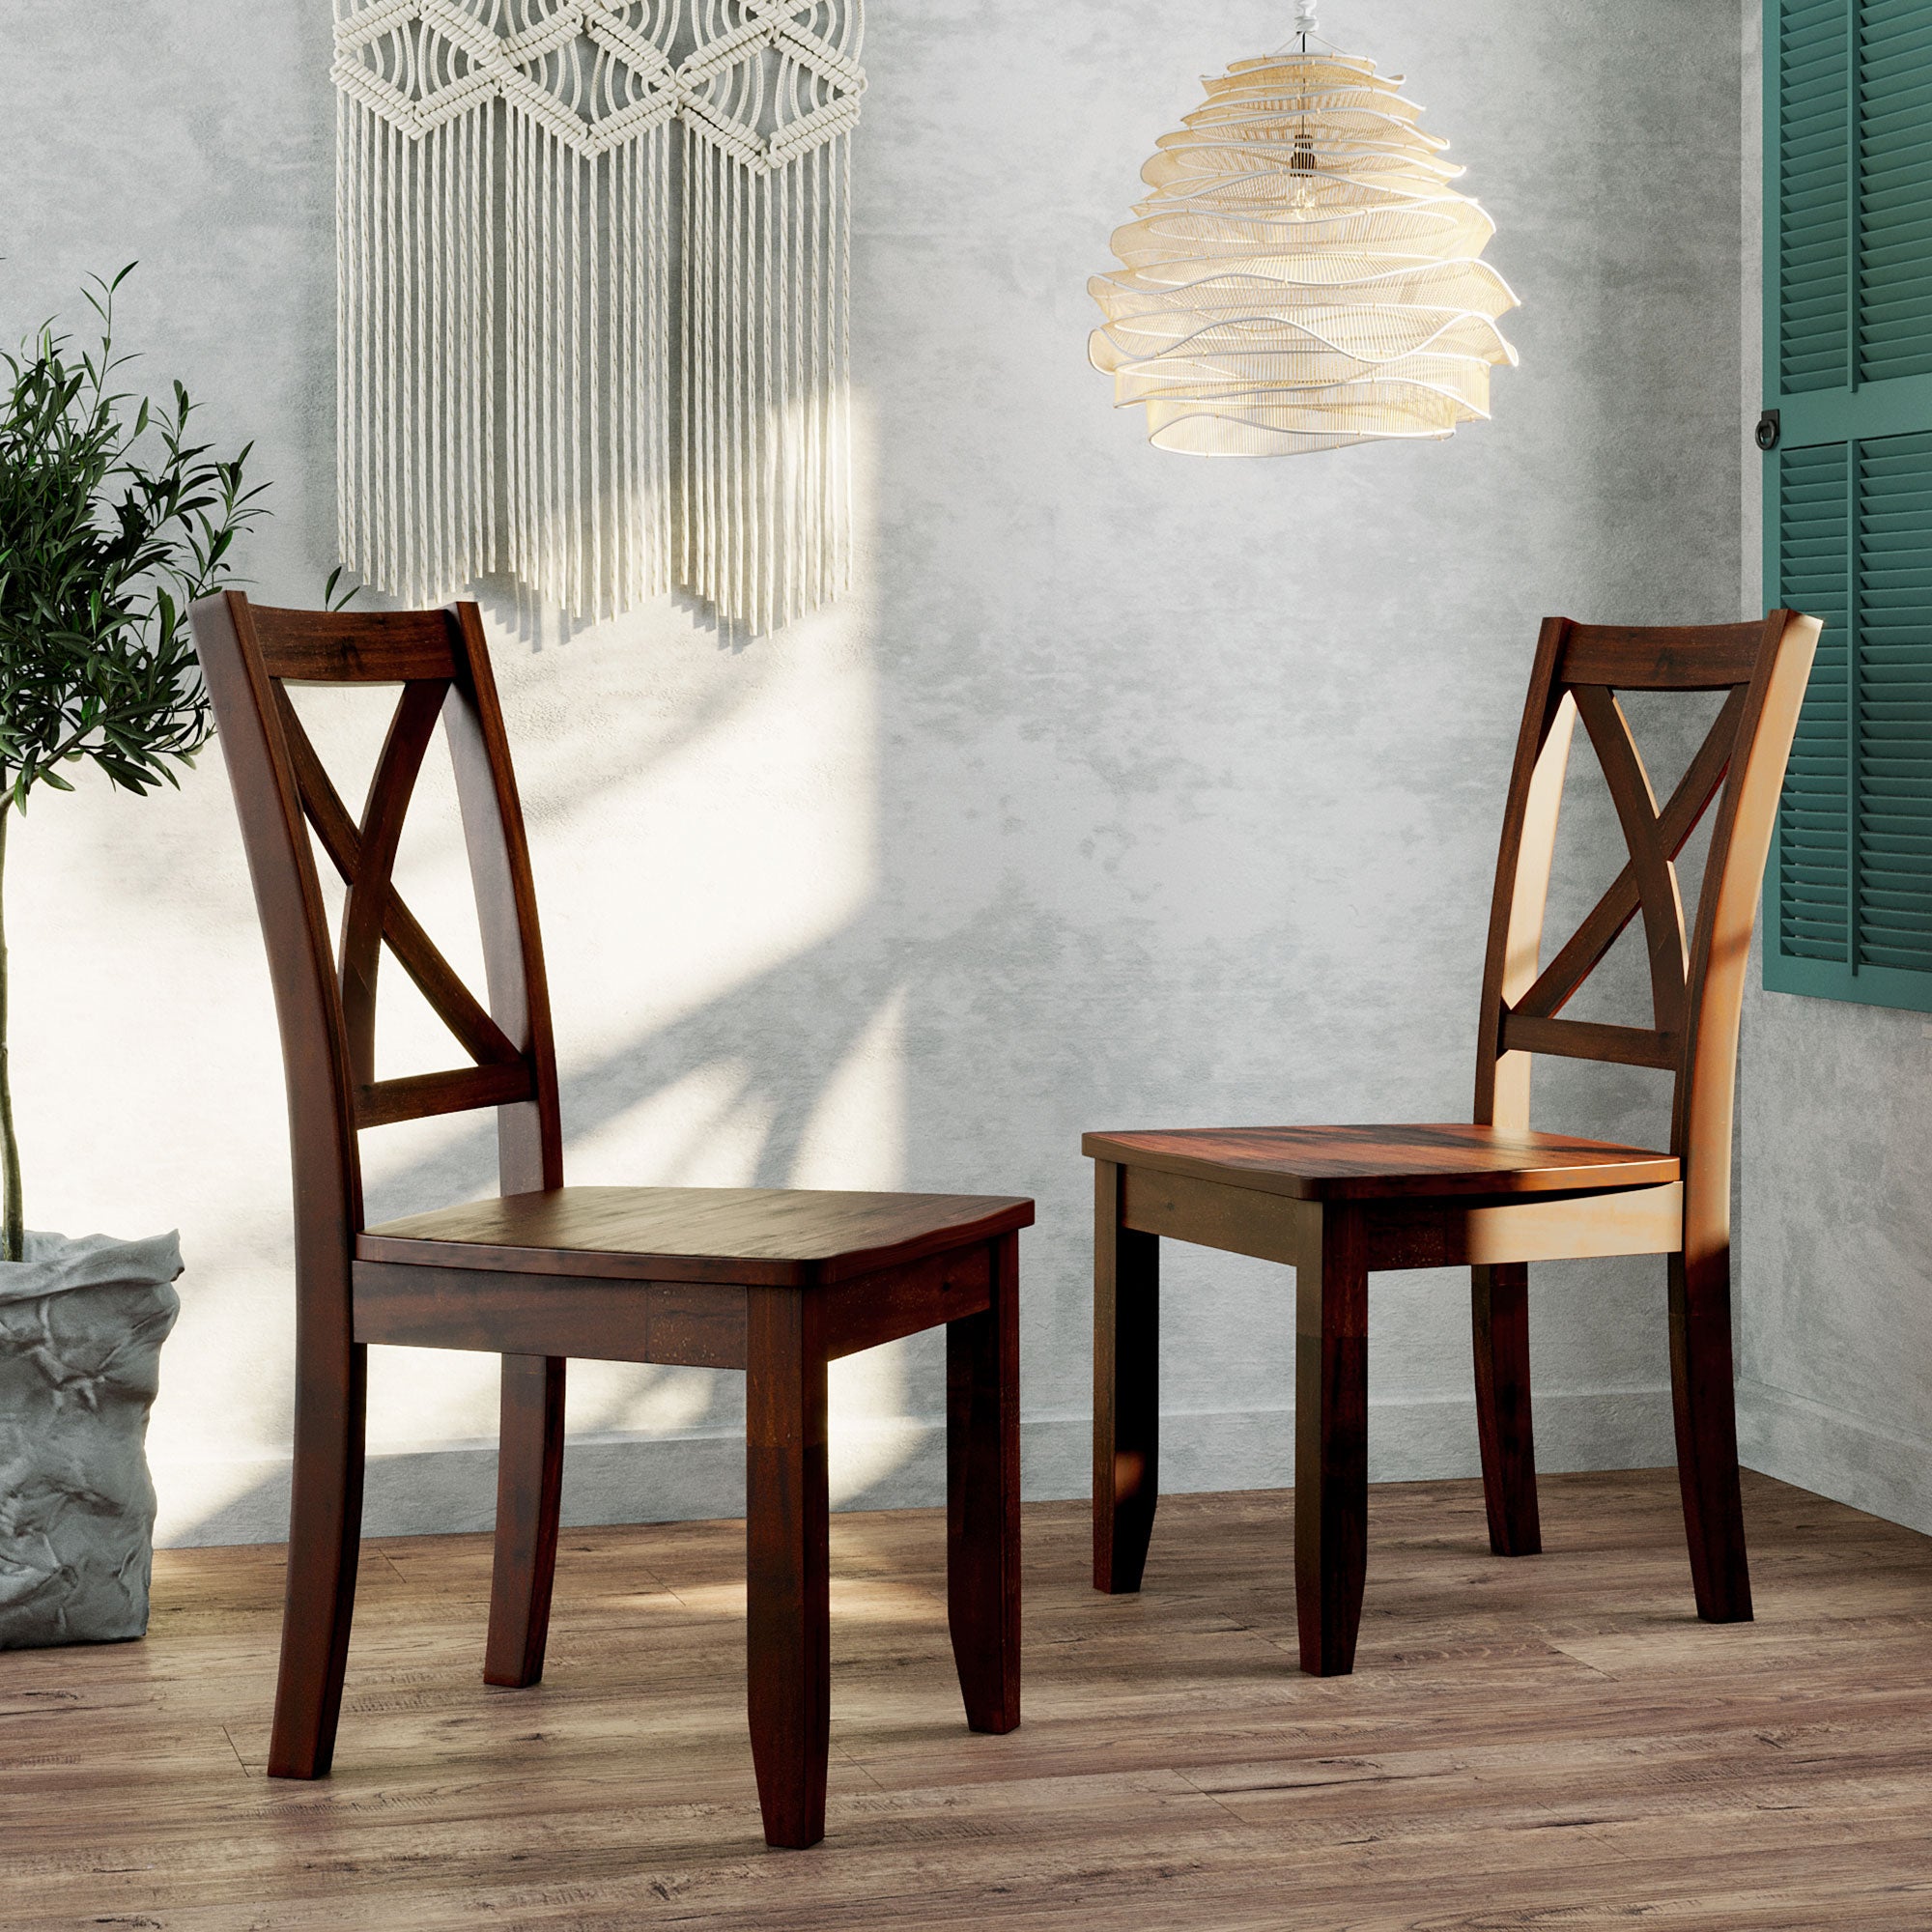 2-Piece X-Back Wood Breakfast Nook Dining Chairs for Small Places, Brown